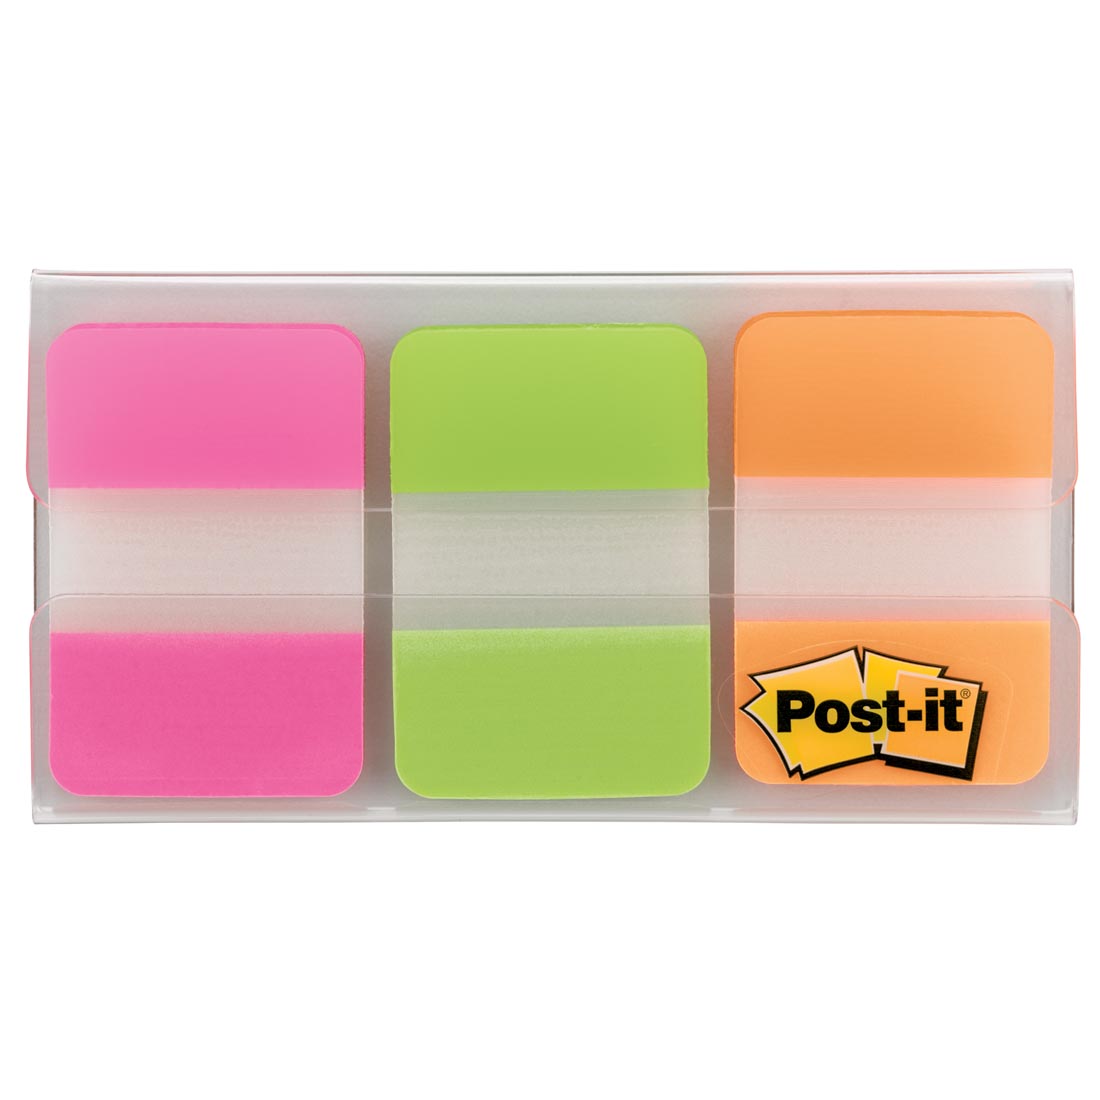 Post-it Durable Tabs: 1 x 1-1/2" in 3 Fluorescent Colors